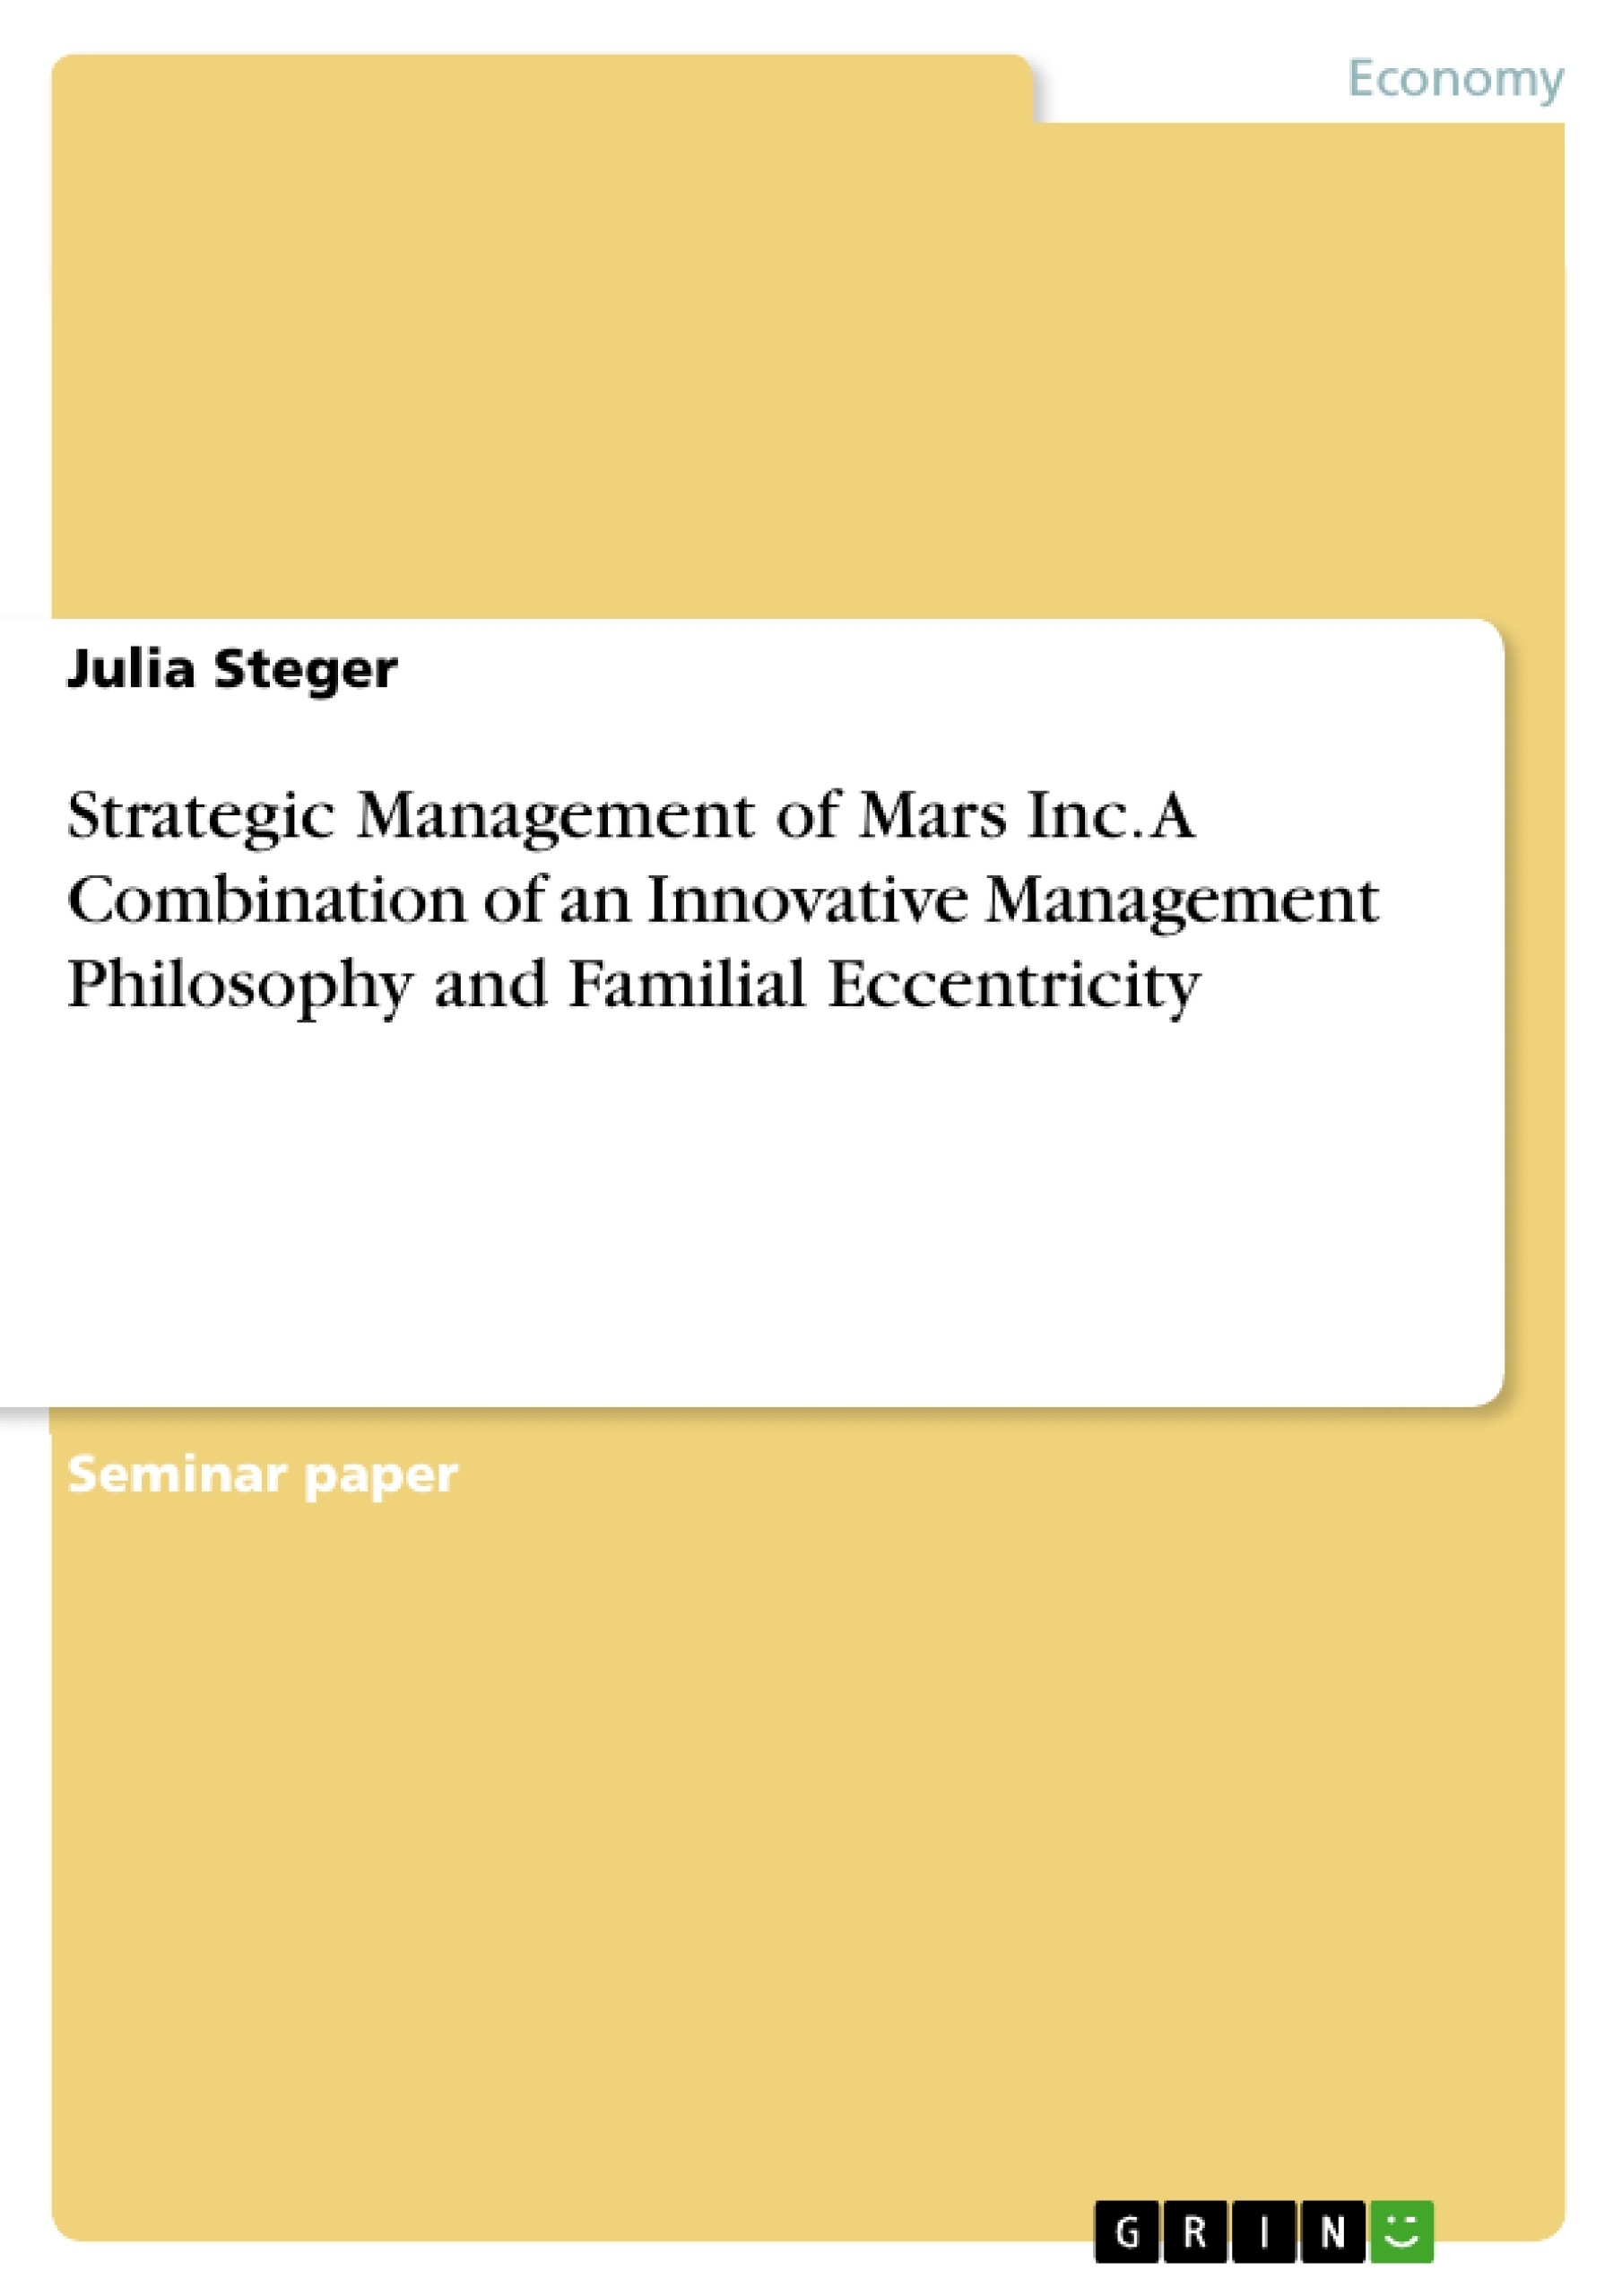 Título: Strategic Management of Mars Inc. A Combination of an Innovative Management Philosophy and Familial
Eccentricity